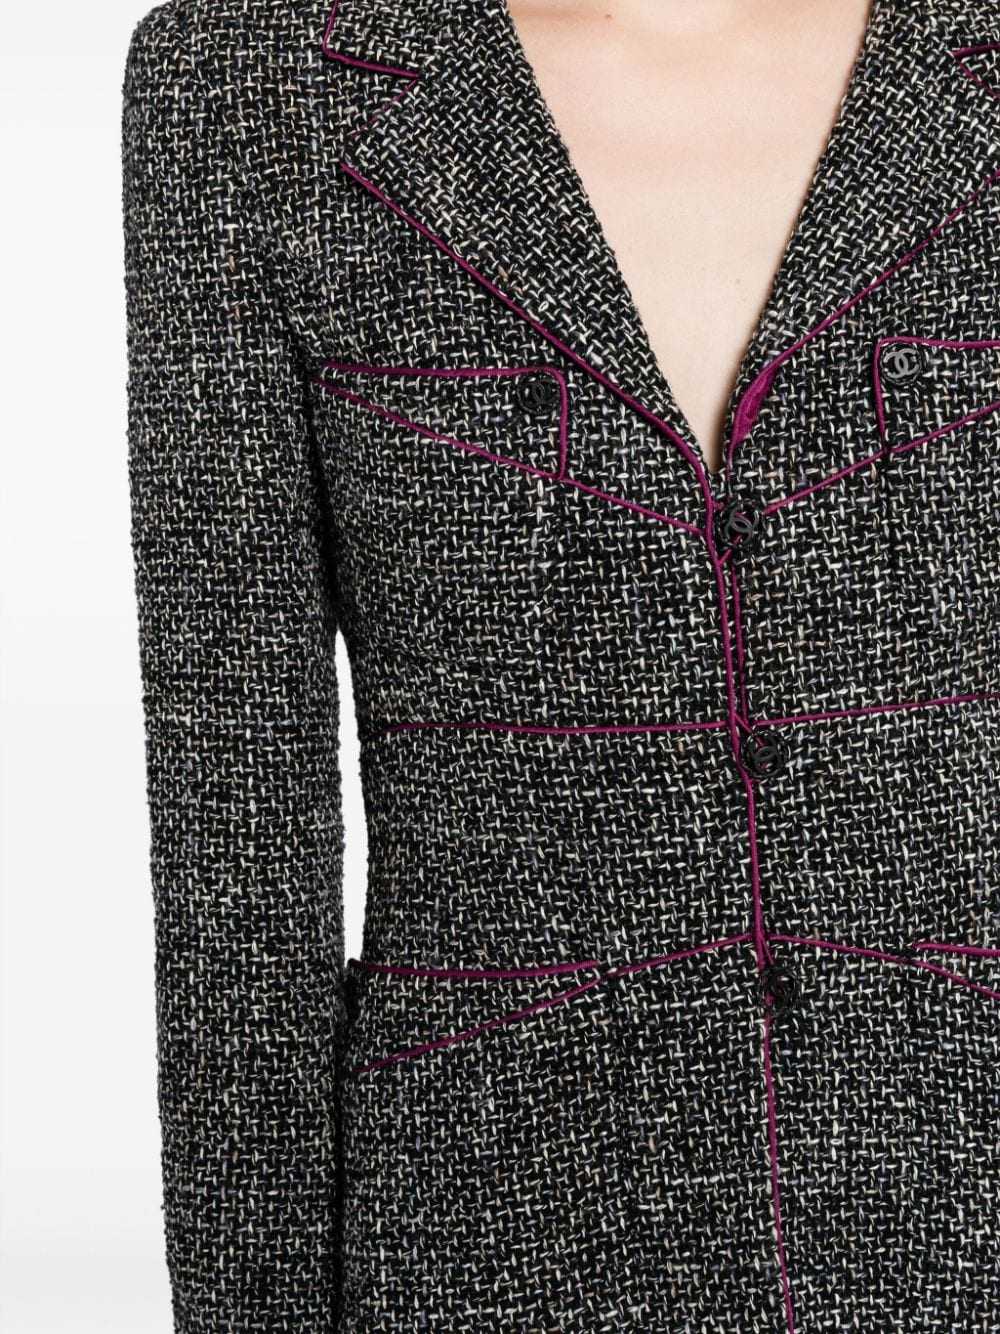 CHANEL Pre-Owned 2003 single-breasted tweed jacke… - image 5